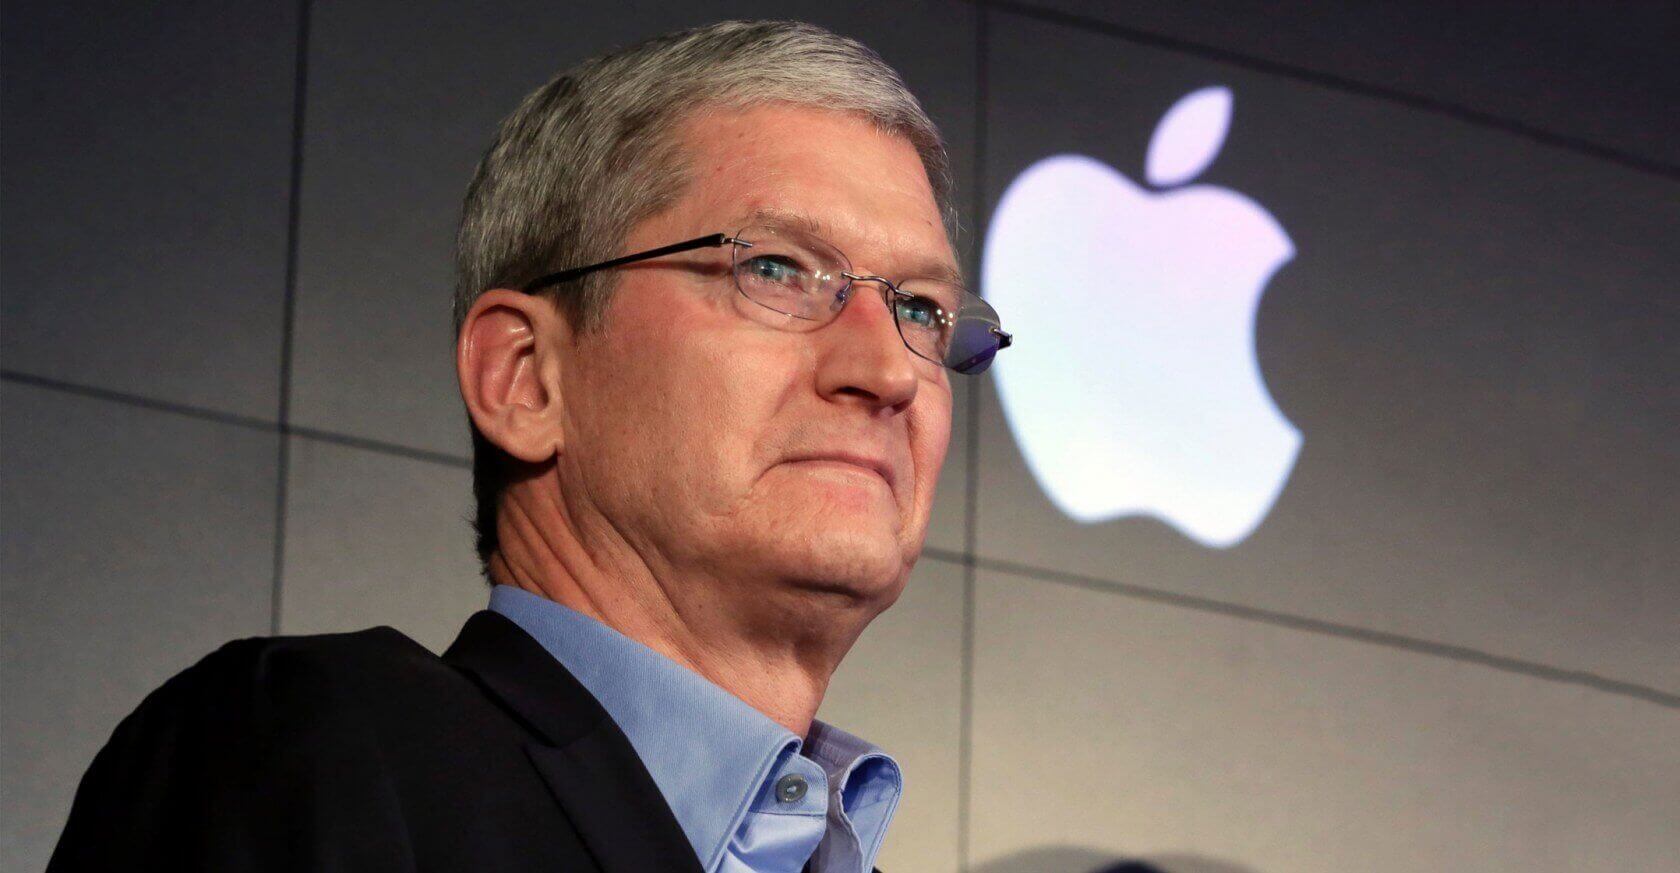 Apple loses two veteran executives from manufacturing and iPhone operations